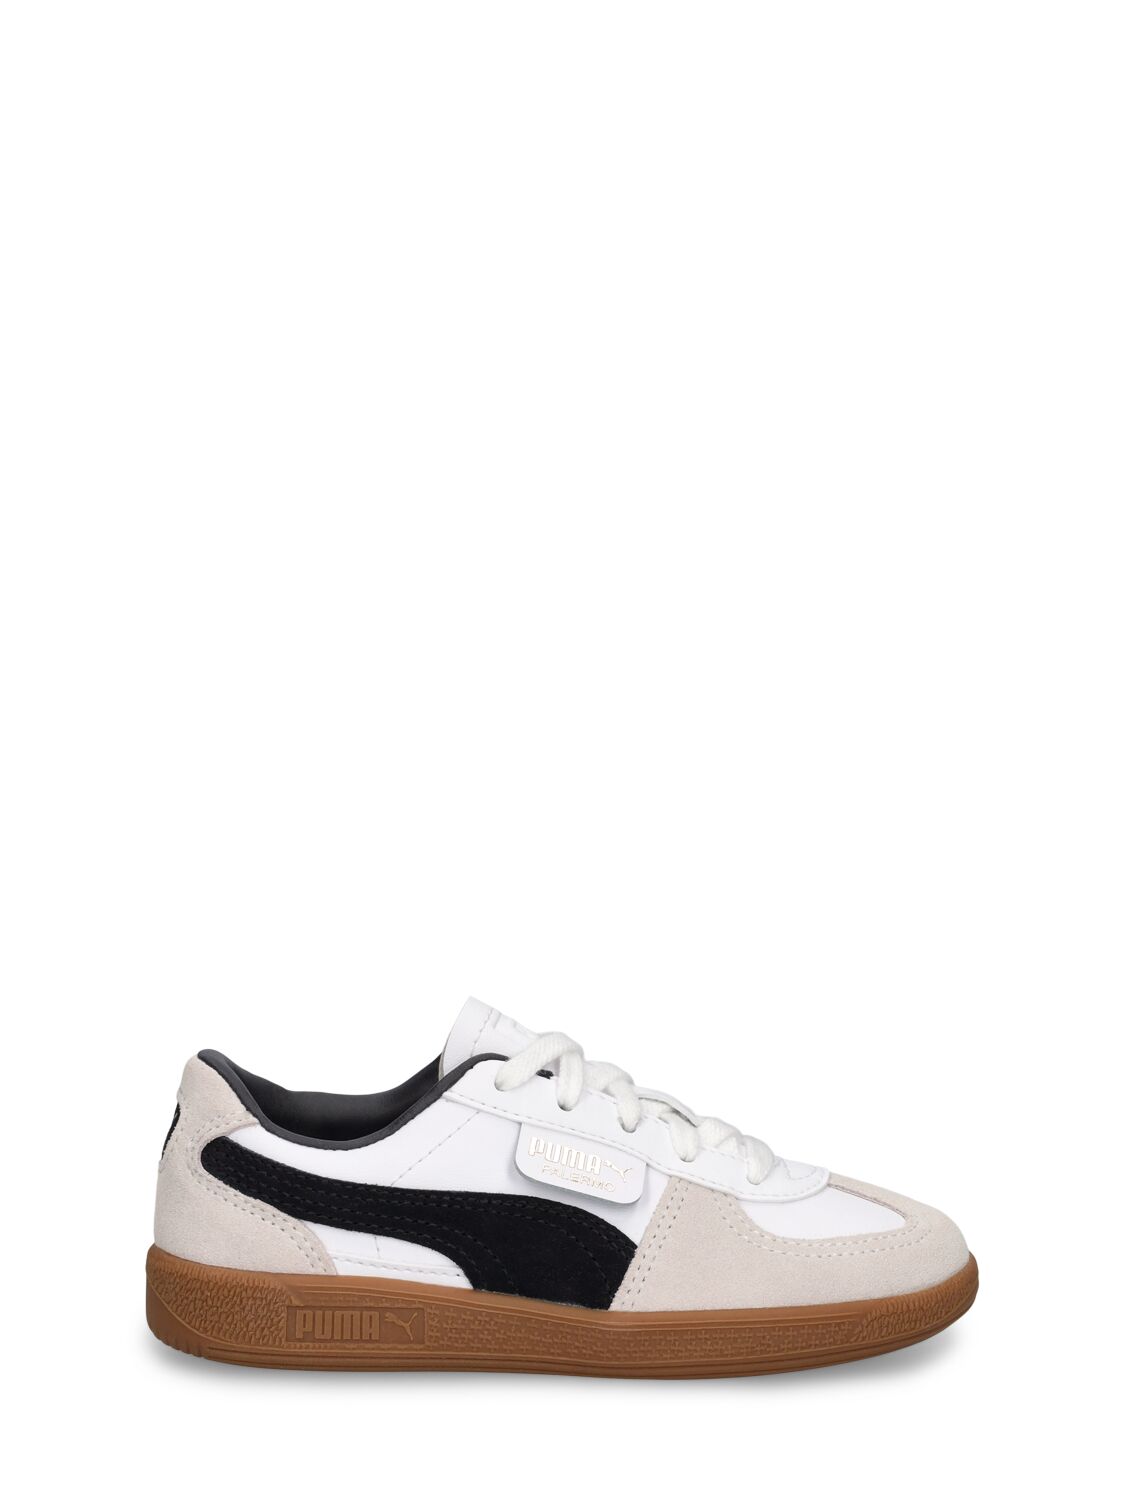 Image of Palermo Lth Sneakers